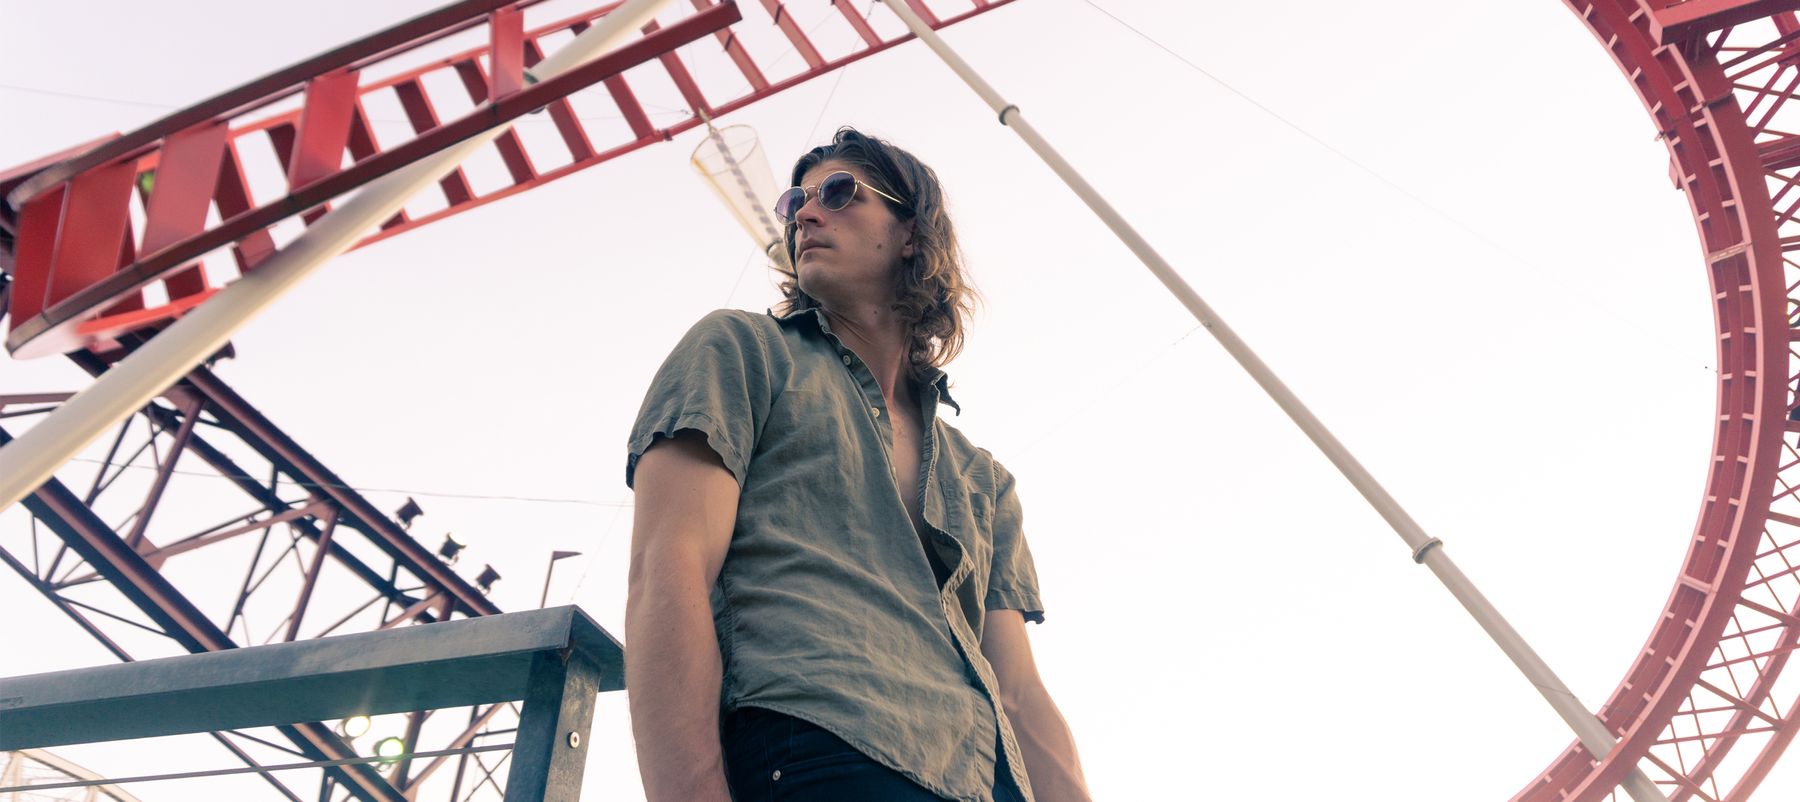 Jon Worthy, dressed in a short sleeved shirt and wearing sunglasses, standing in front of a red frame structure.